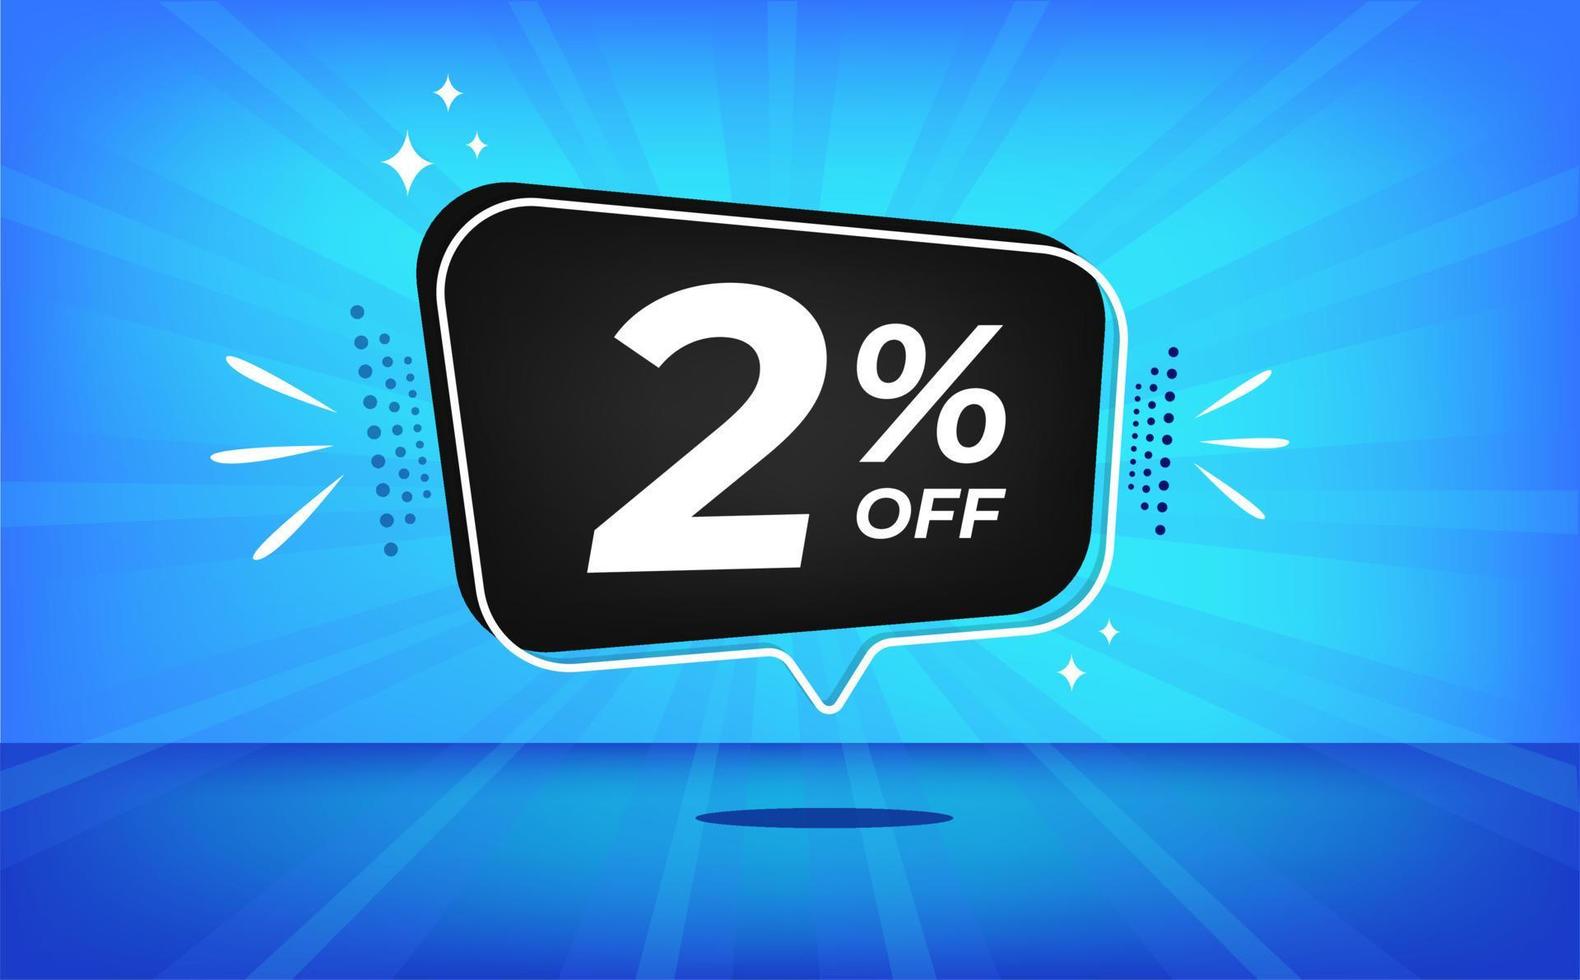 2 percent off. Blue banner with two percent discount on a black balloon for mega big sales. vector